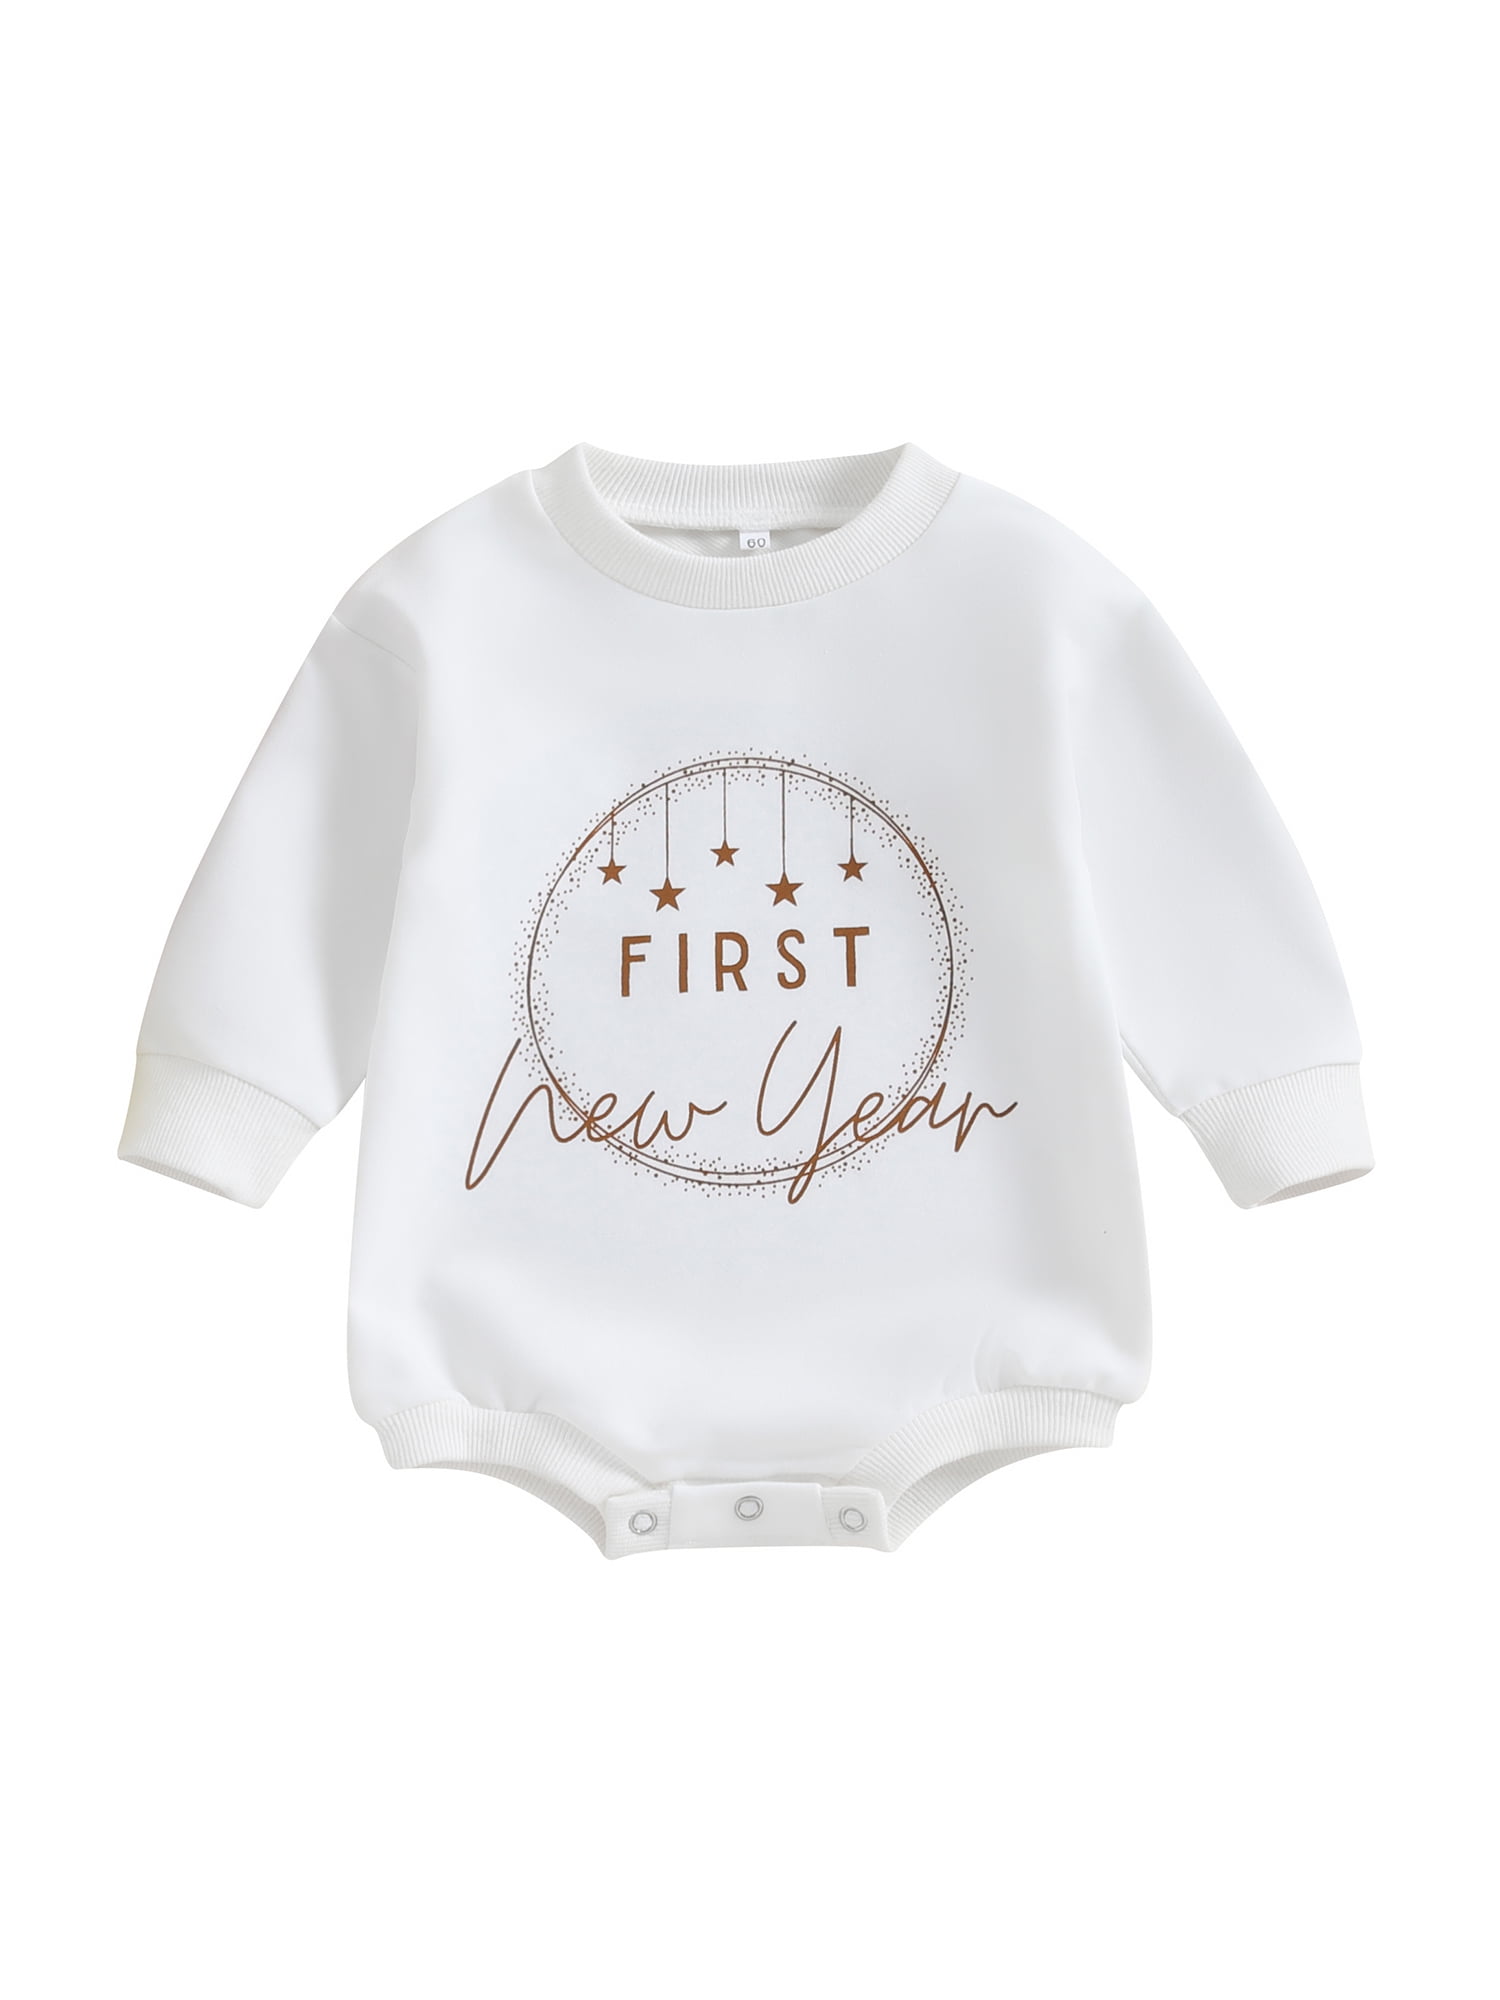 Luethbiezx Cute Baby New Year Onesie with Letter Print and Long Sleeves ...